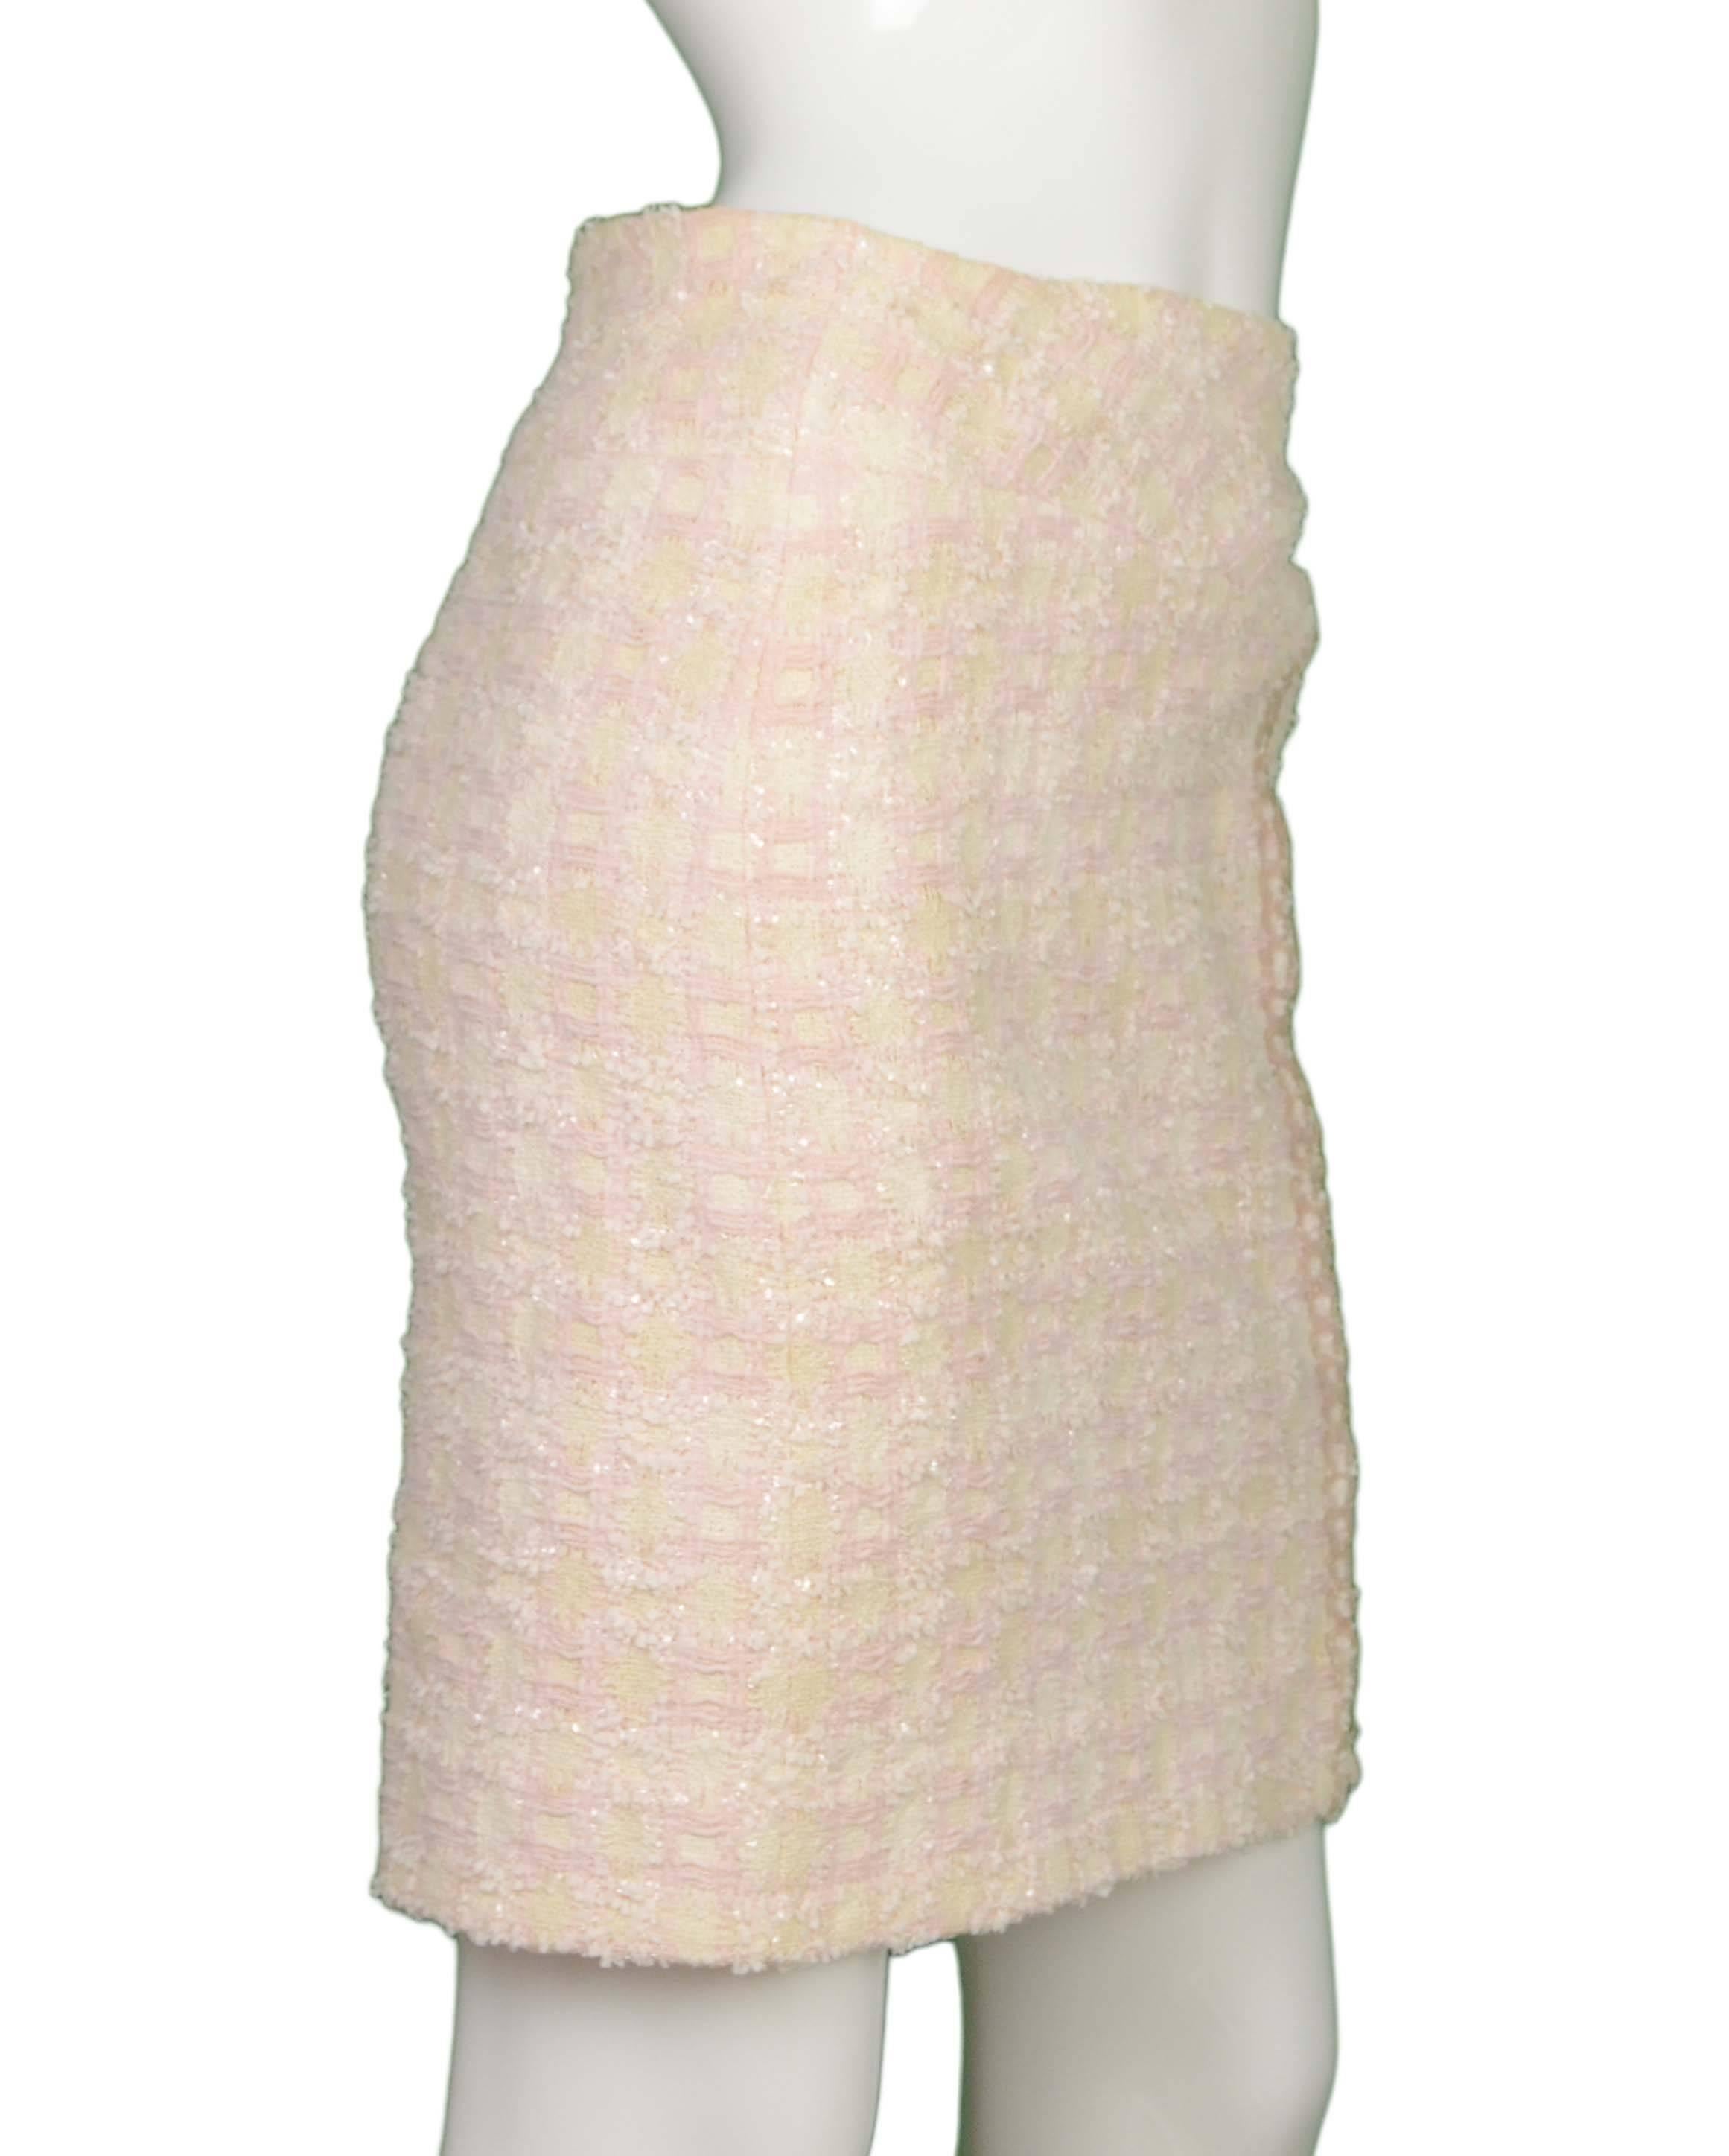 Chanel Claudia Schiffer Vintage '95 Beige & Pink Tweed Skirt Suit sz 46 In Excellent Condition In New York, NY